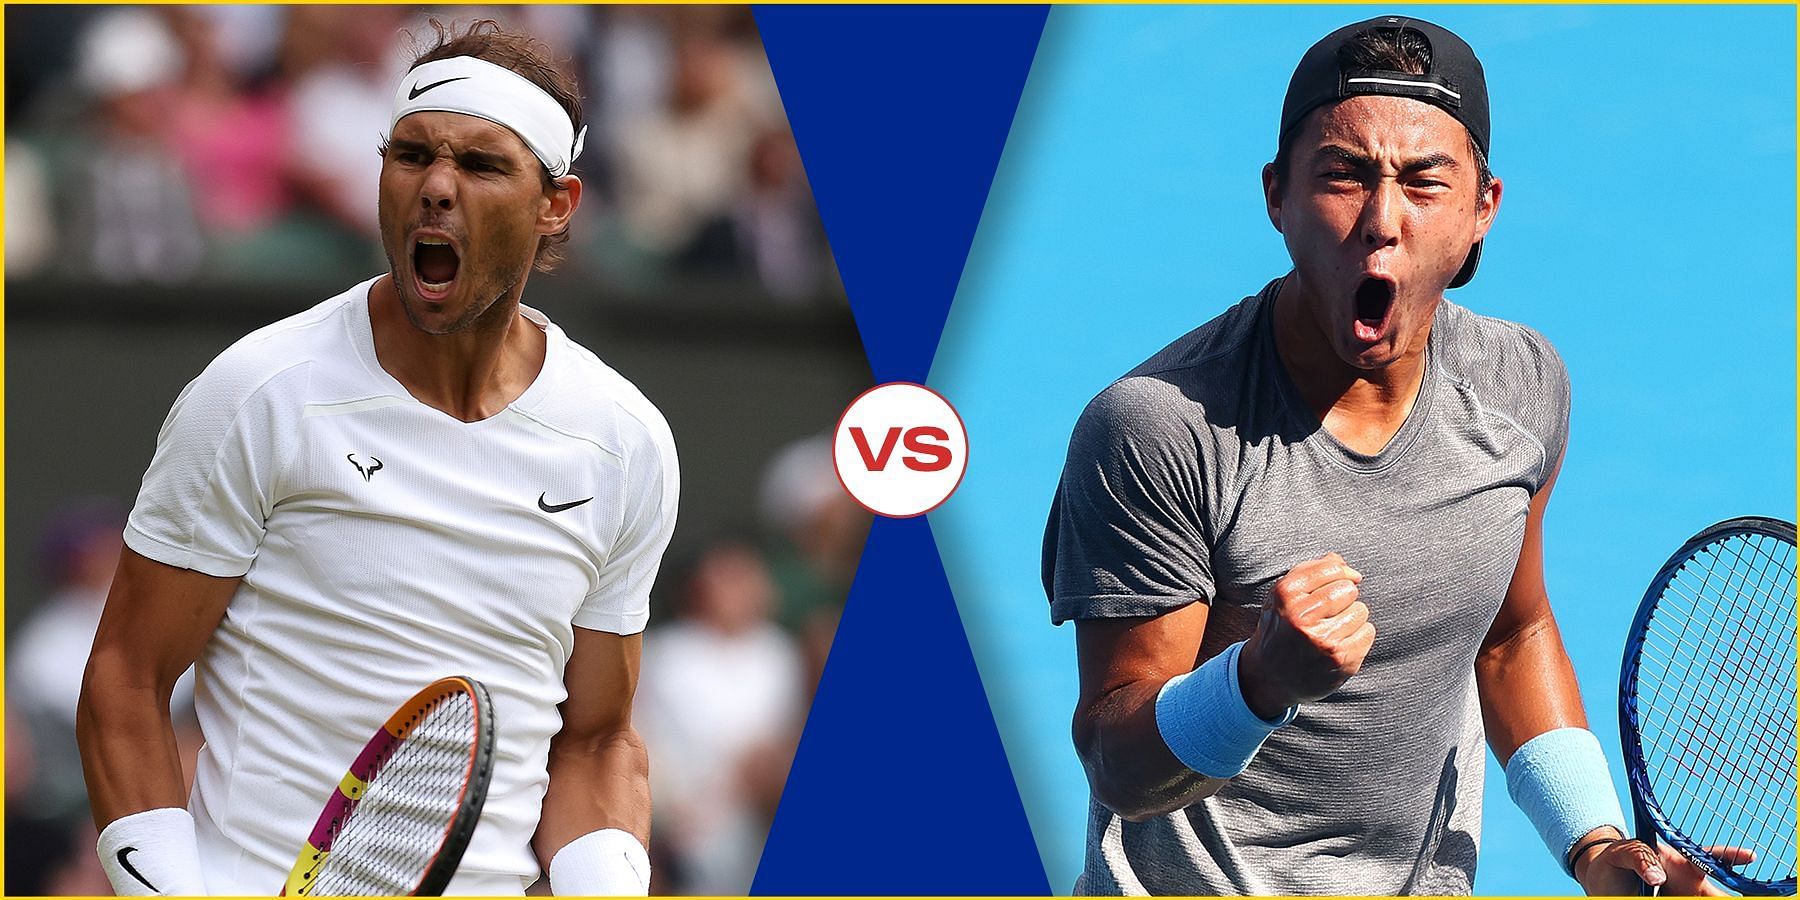 Rafael Nadal will face Rinky Hijikata in the first round of the US Open